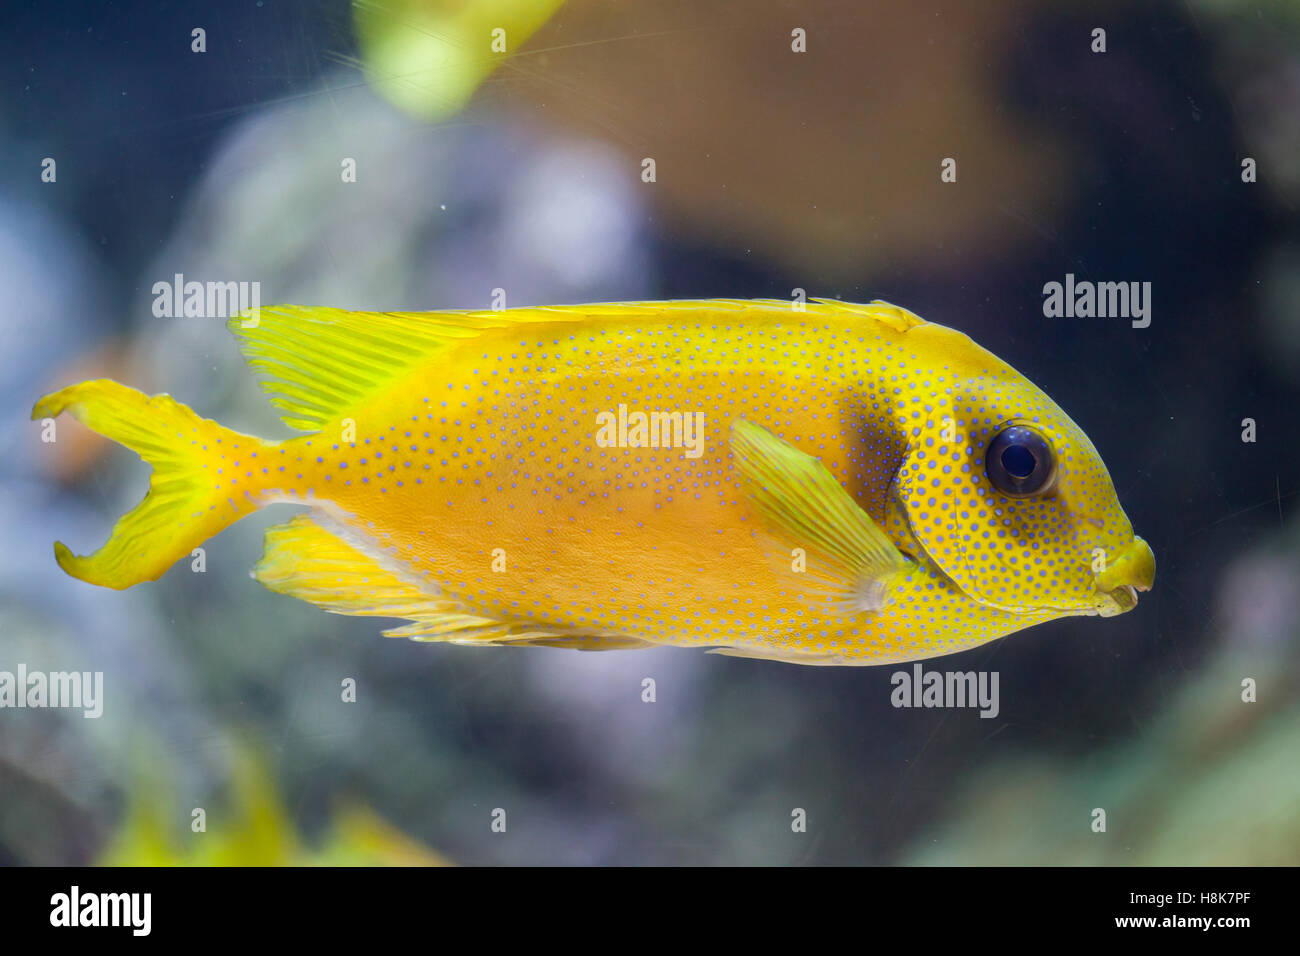 Blue-spotted spinefoot (Siganus corallinus), also known as the coral rabbitfish. Stock Photo